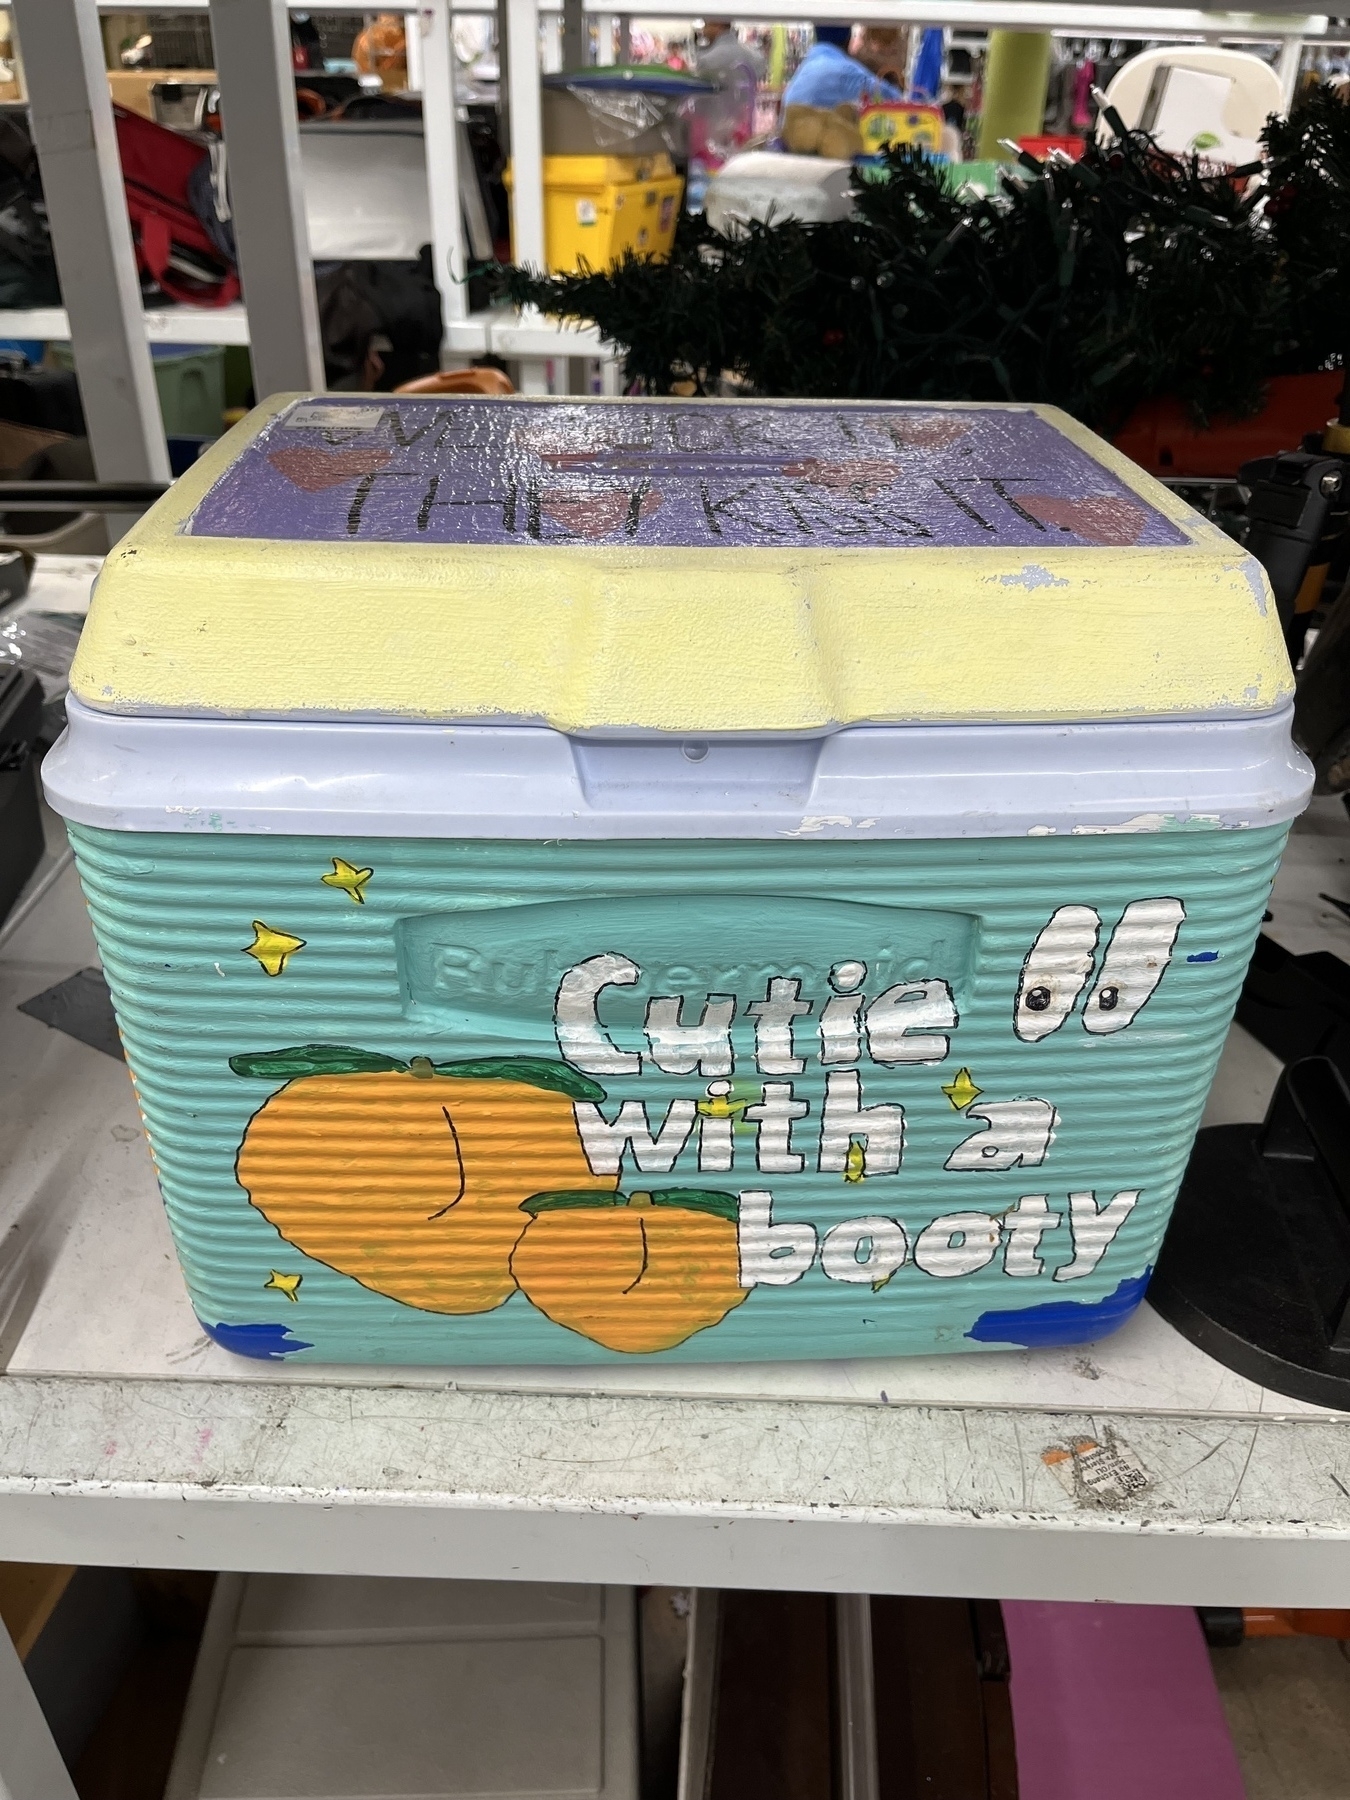 Cooler with hand painted words saying “Cutie with a Booty.” 👀